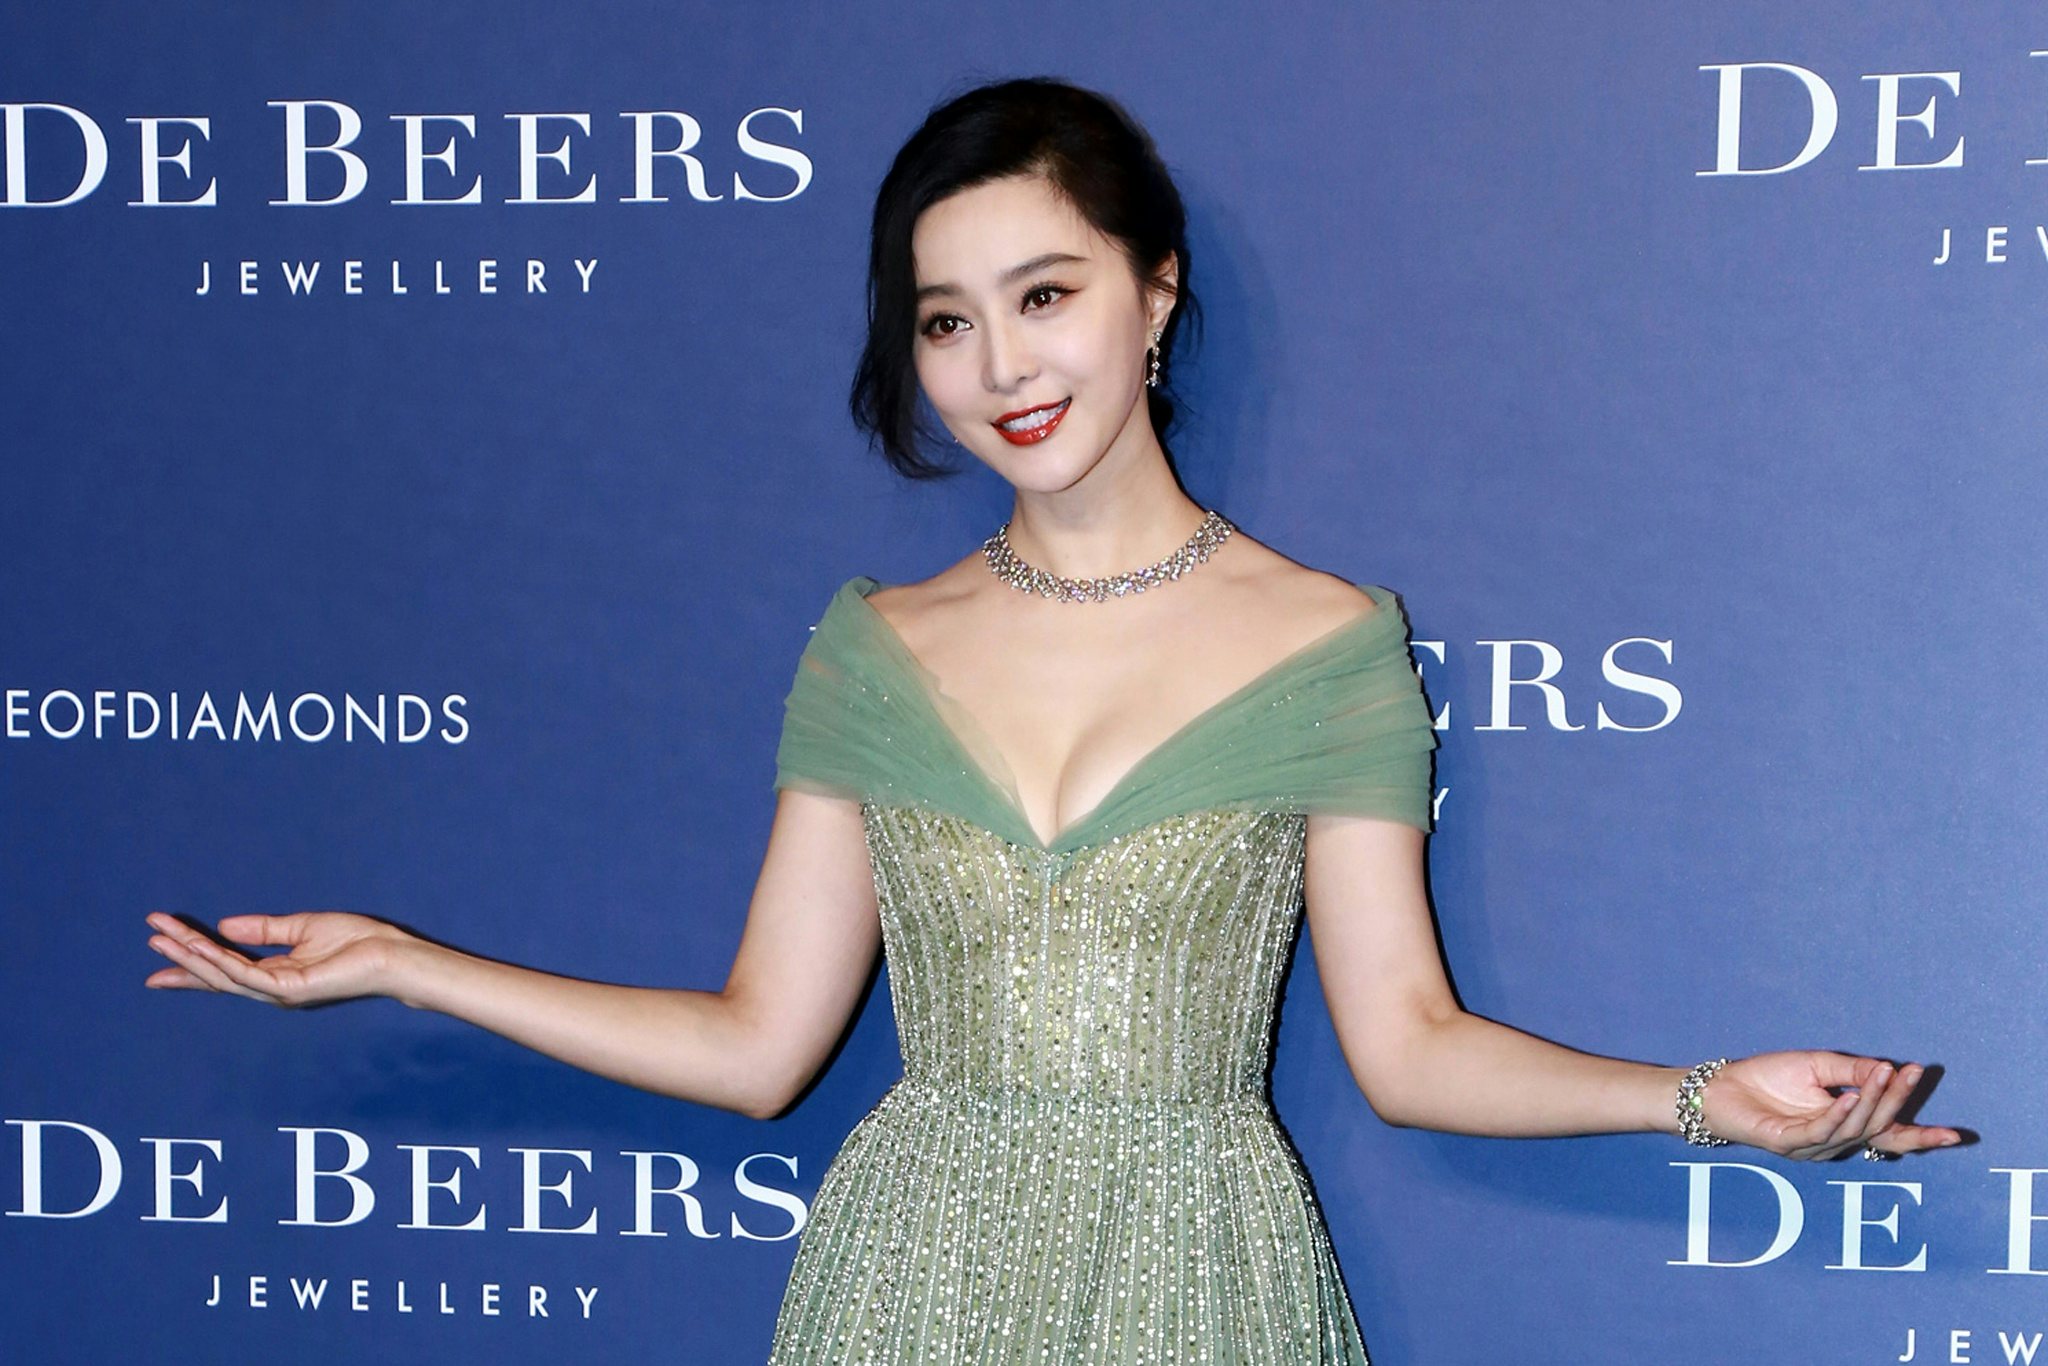 Fan Bingbing, who has long been the famous face of campaigns for Louis Vuitton, De Beers, Guerlain, and Montblanc, was fined by the government for tax evasion. Photo: VCG